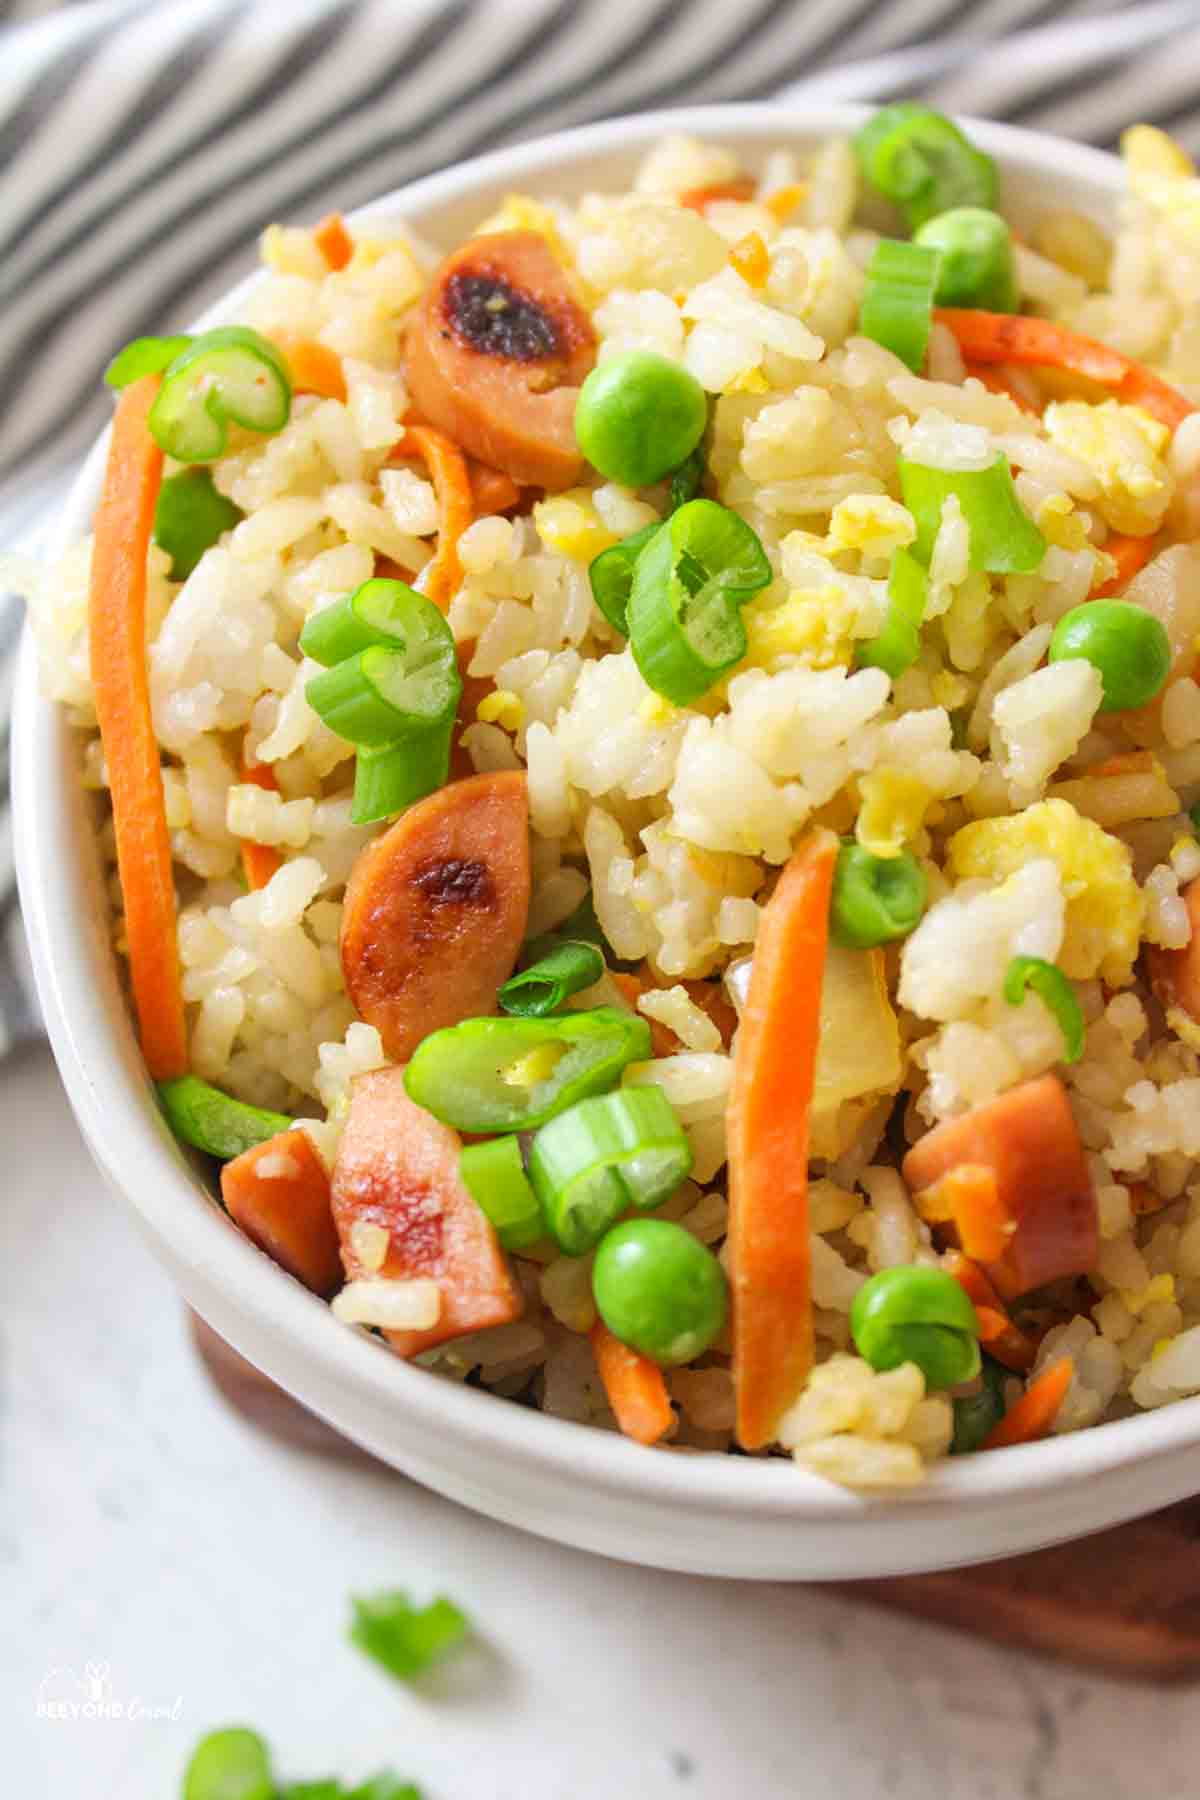 a bowl filled with hot dog fried rice and garnished with sliced green onions.